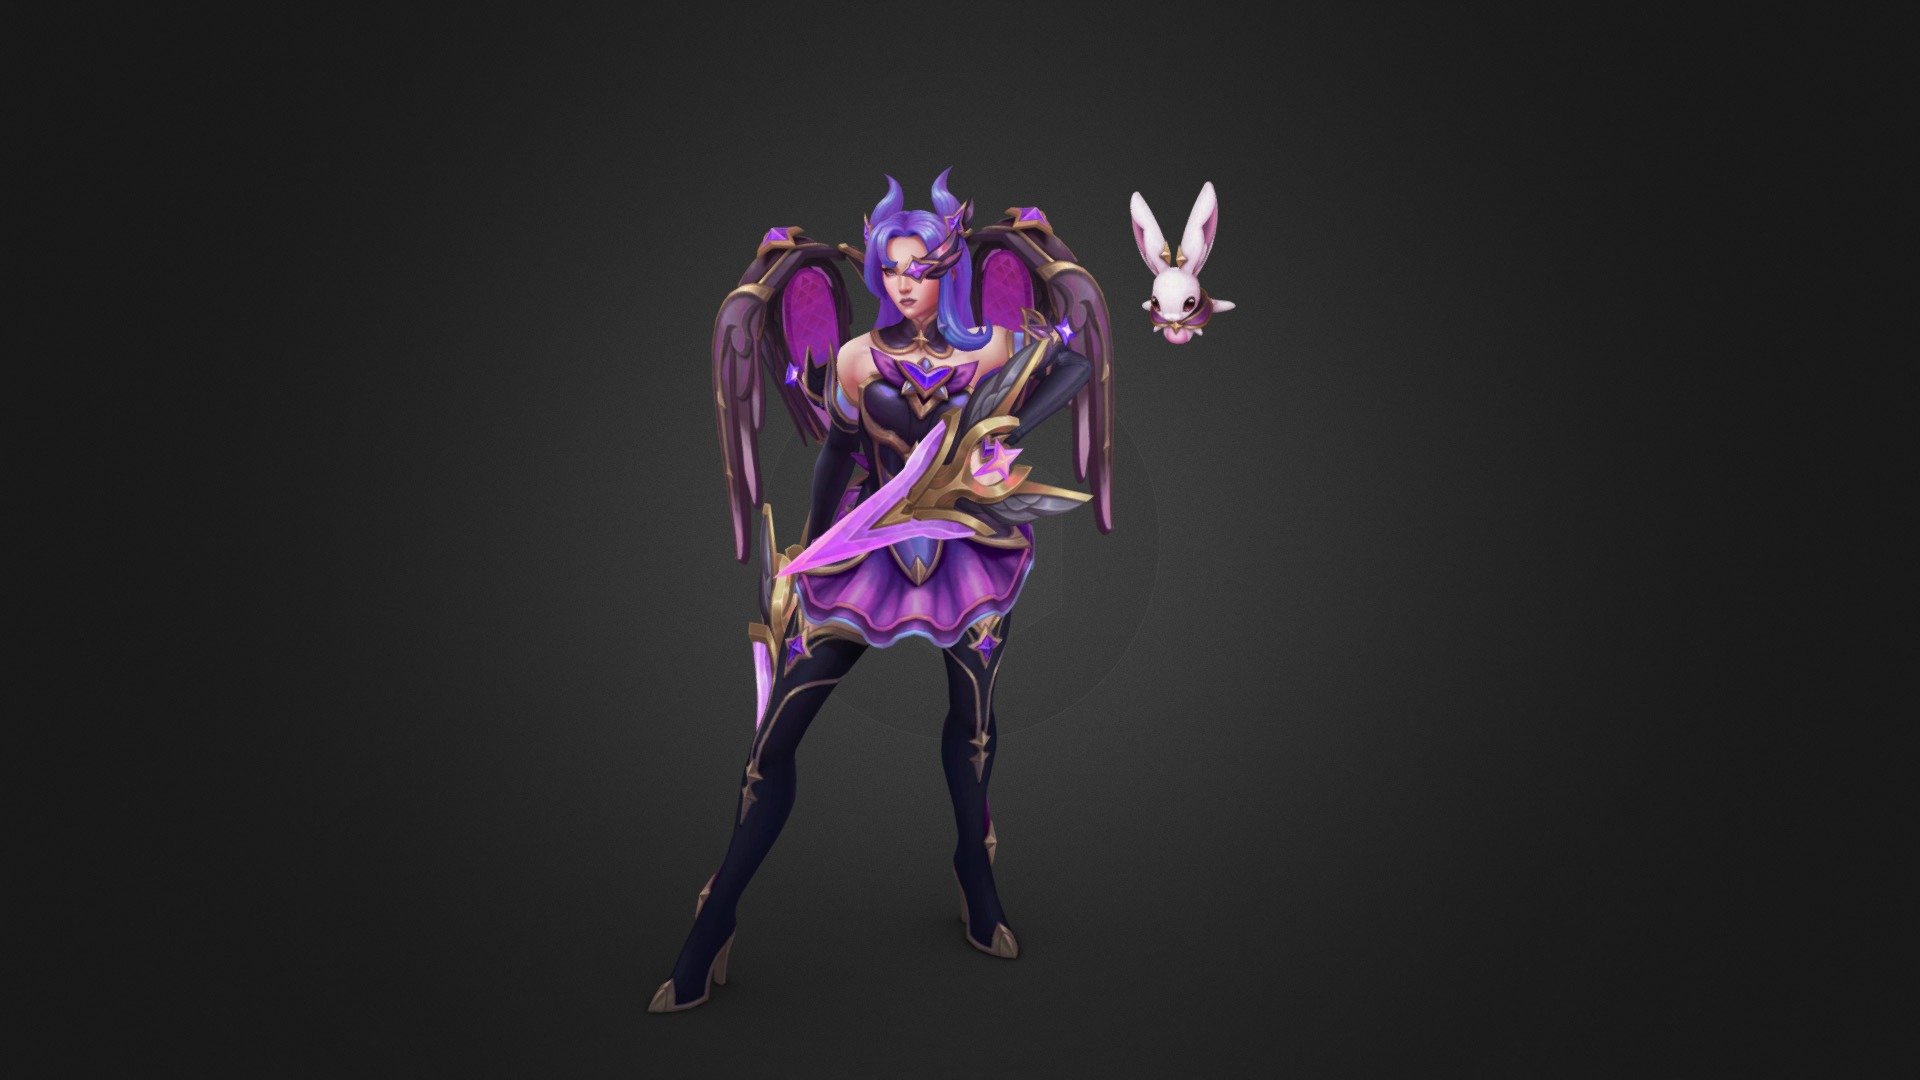 Made as a playable custom skin
This model is an inofficial Chroma version for Star Guardian Kai'Sa.

In order to play this custom skin, visit Quings! - Corrupted Star Guardian Kai'Sa - 3D model by Vector (@VectorCRE) 3d model